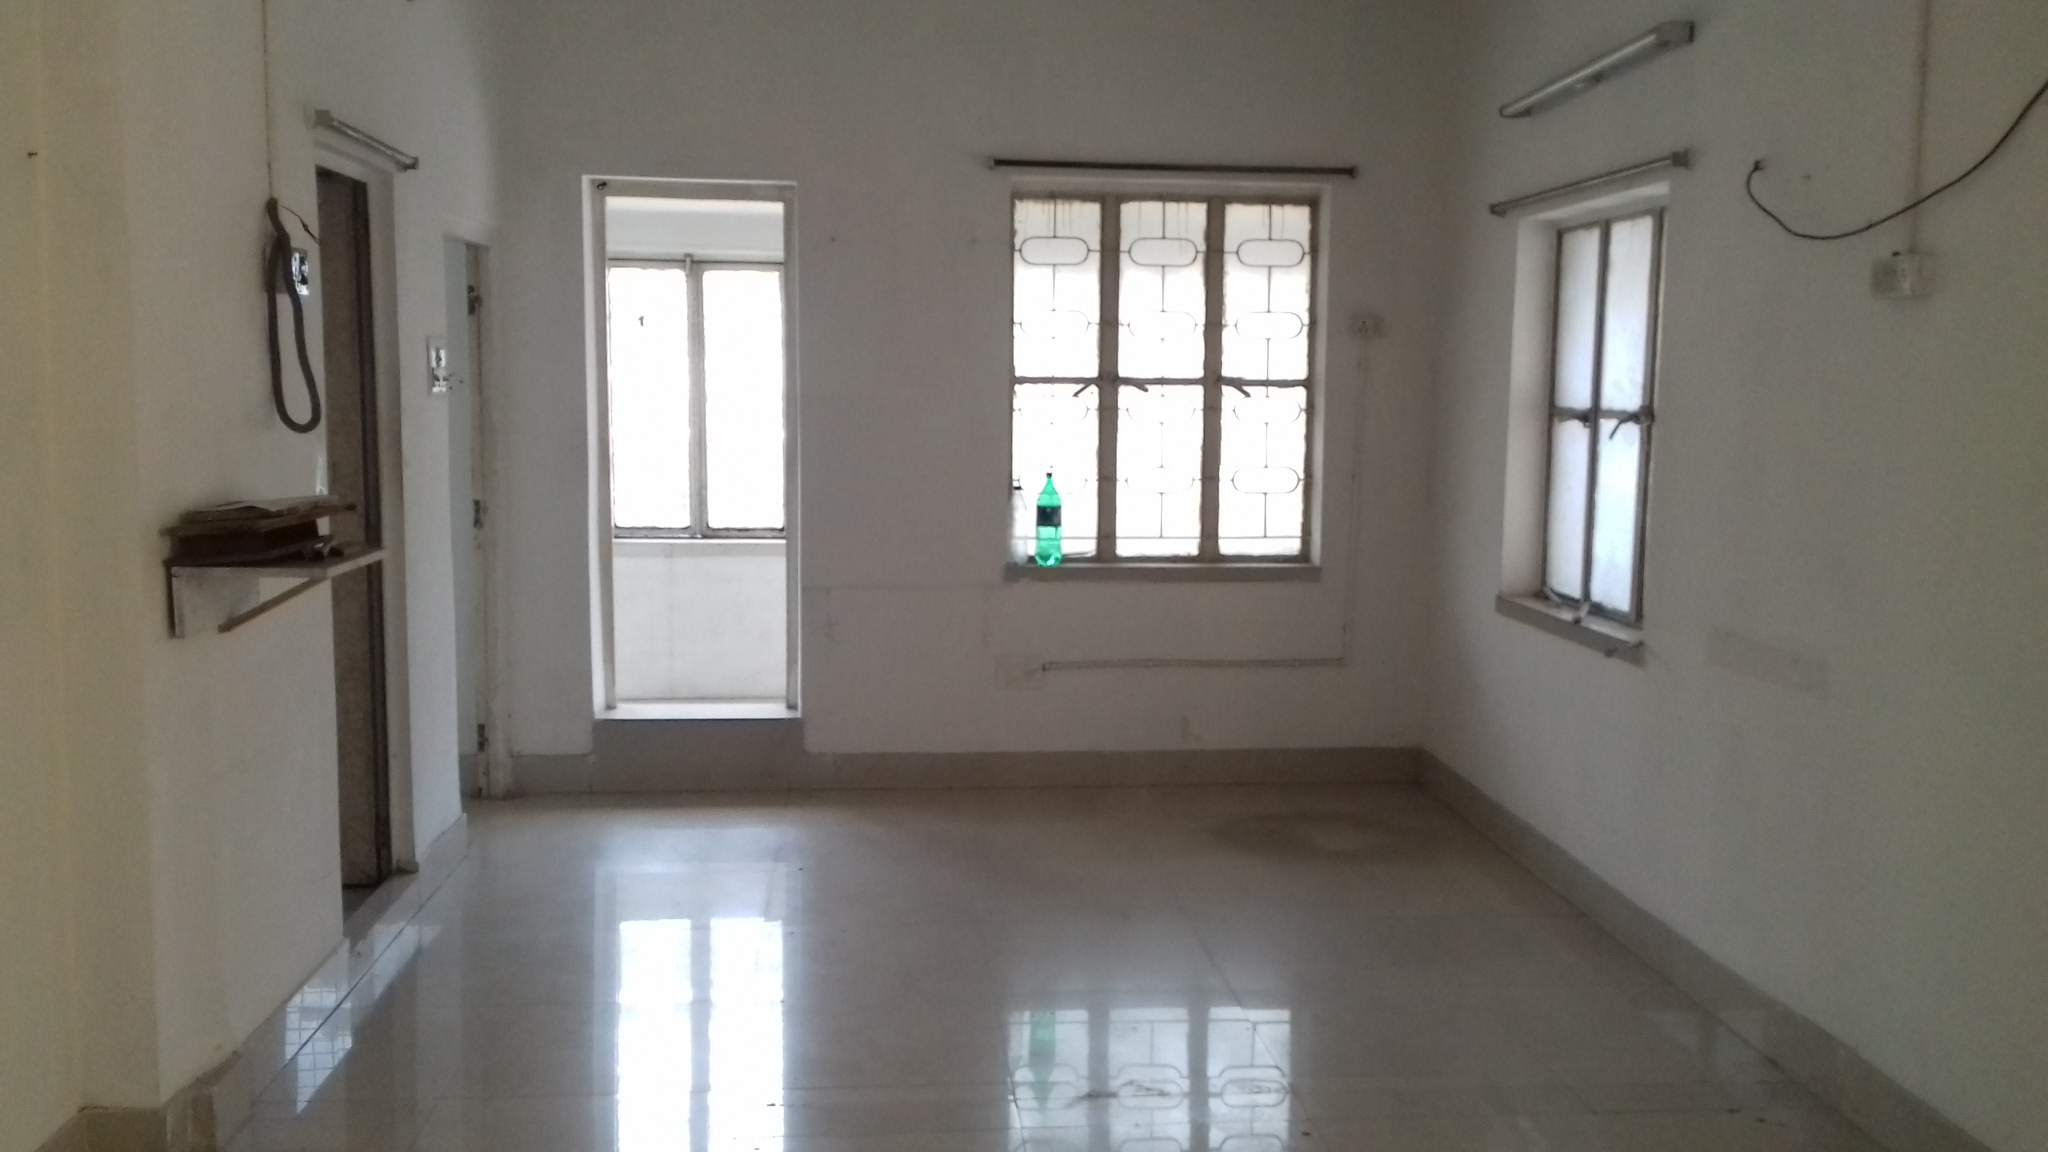 Office For Rent in Tollygunge Kolkata (Id: 12884)